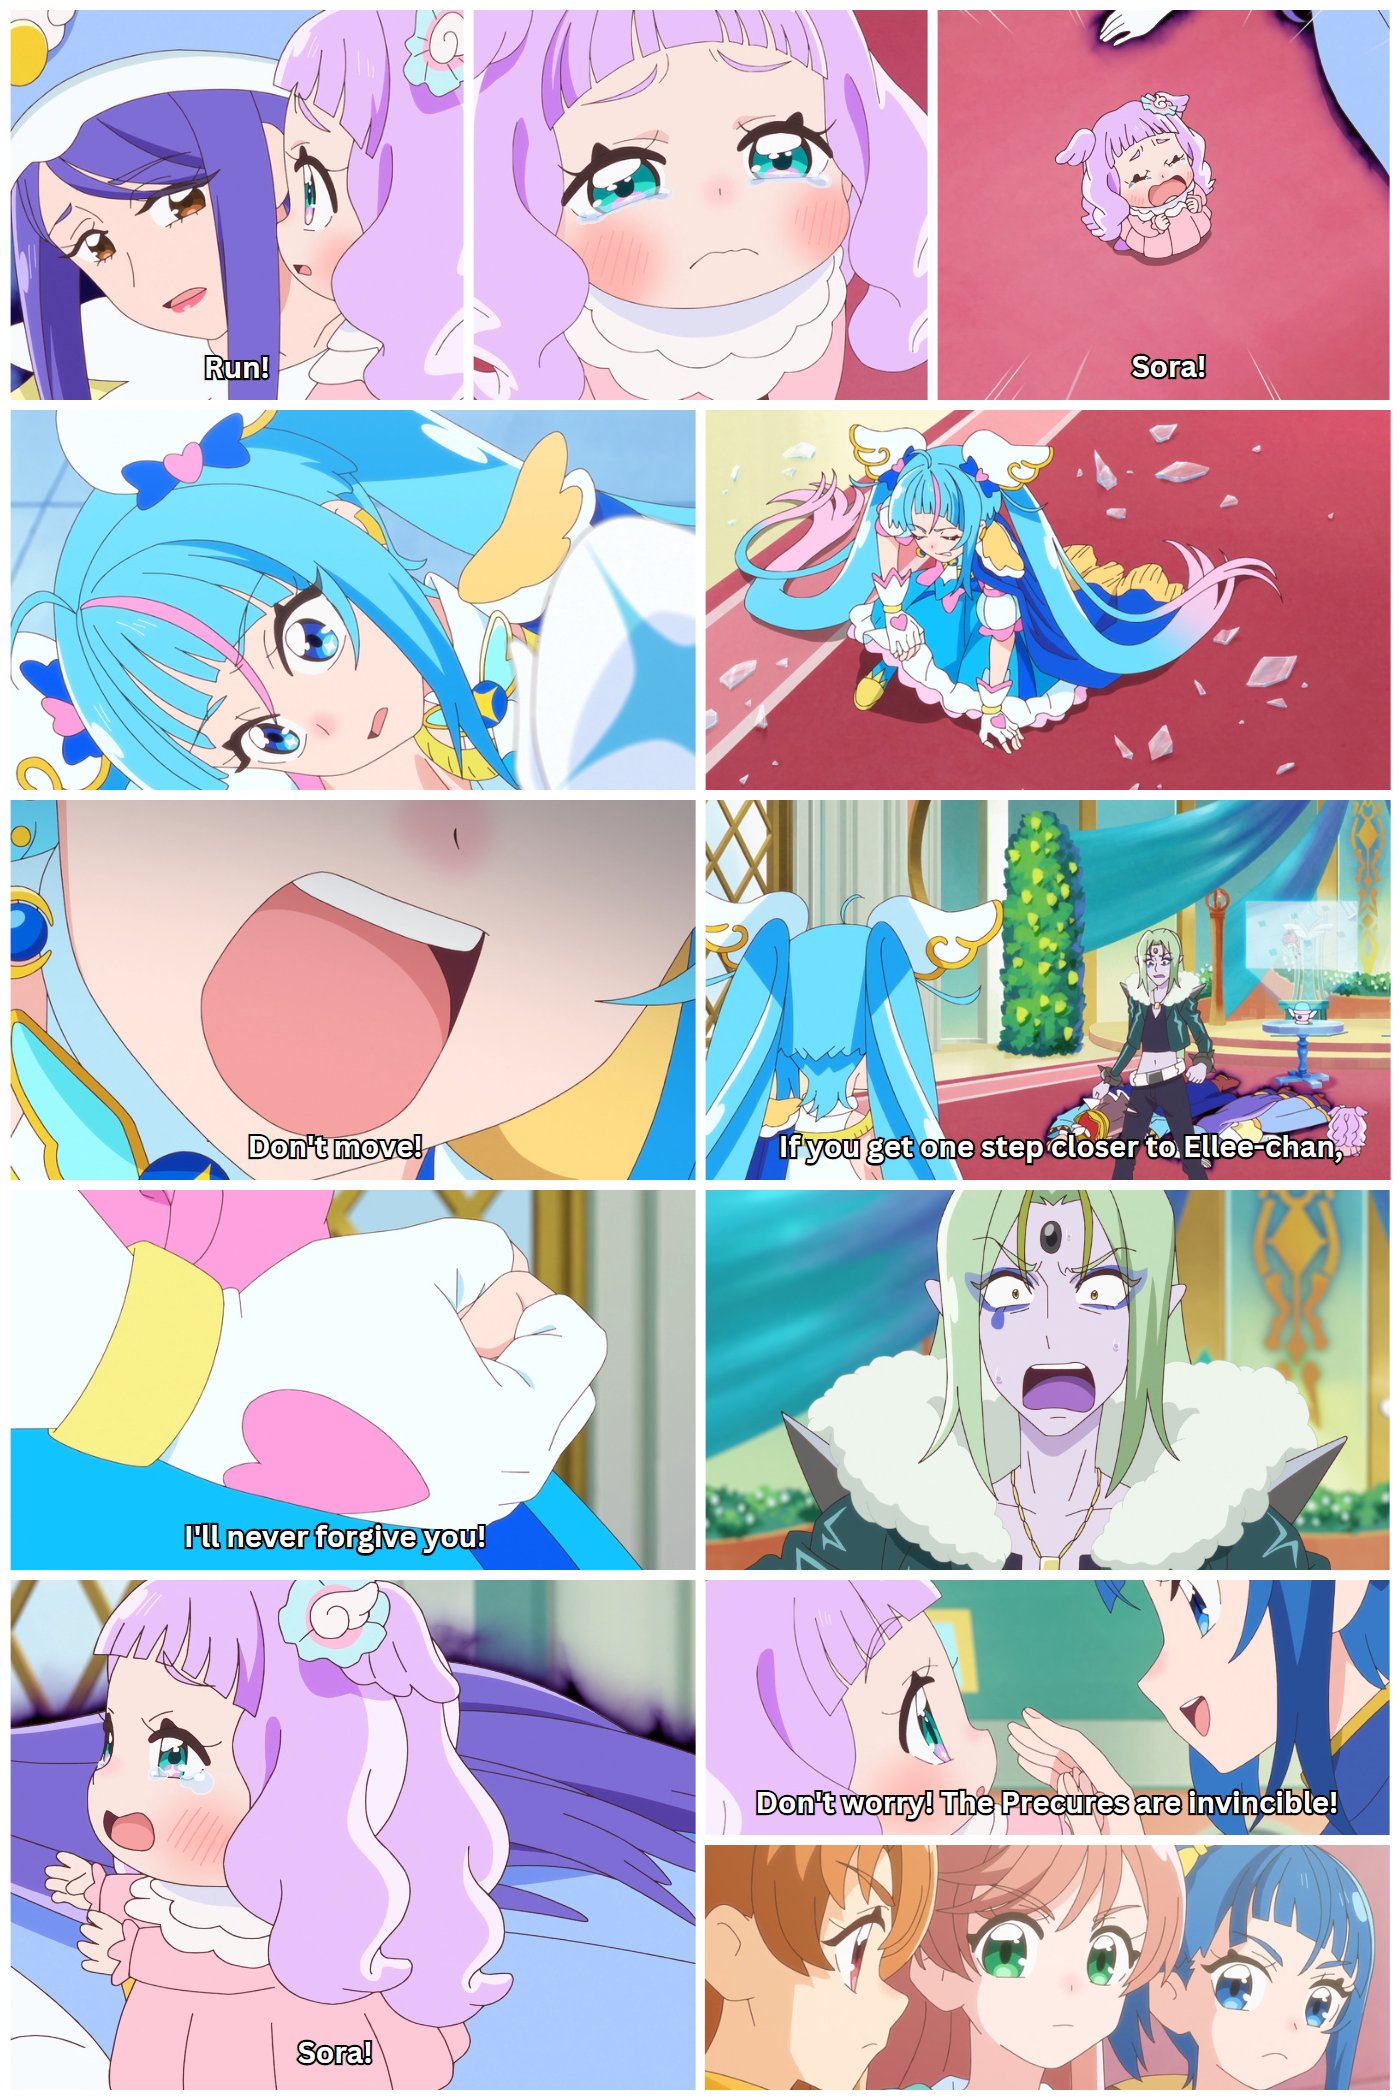 𝖗𝖆𝖓𝖟𝖊🔎 on X: ✨ NEWS ✨ 2023 PreCure season will be a